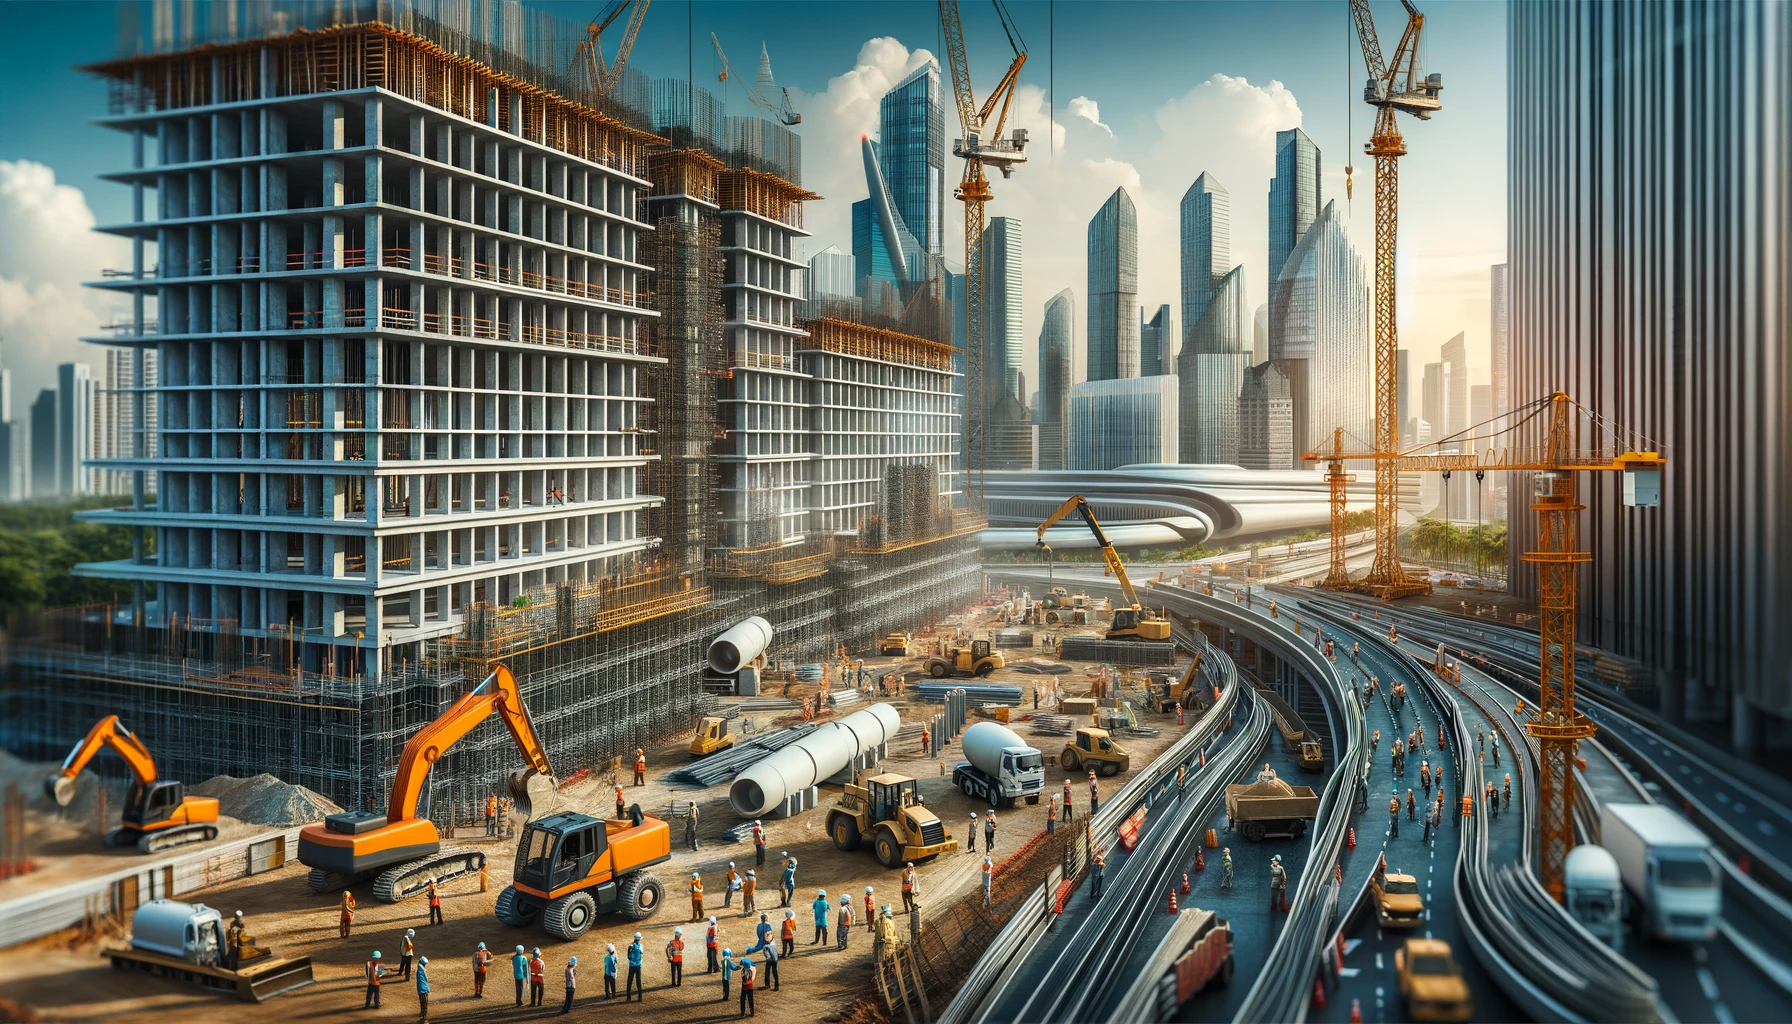 An expansive construction site in an urban Asian setting, illustrating the development of a modern hotel. The image features a wide array of construction machinery, including cranes and bulldozers, amid an active building process. Diverse workers, clad in safety gear, are engaged in various construction tasks. In the background, a skyline of contemporary Asian architecture with towering skyscrapers is visible under a bright blue sky, symbolizing the rapid urban development and architectural advancements in the region.